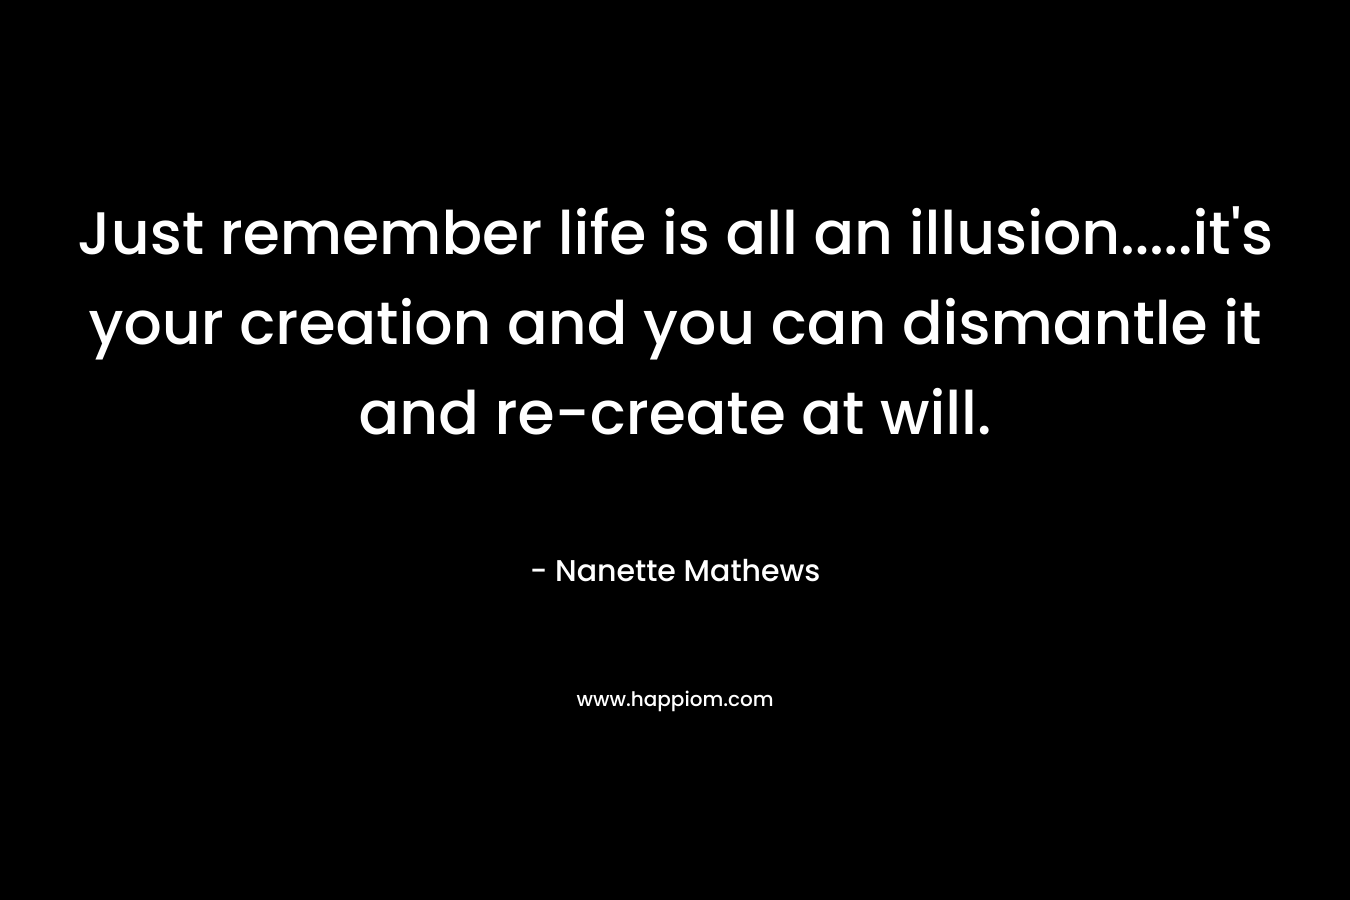 Just remember life is all an illusion.....it's your creation and you can dismantle it and re-create at will.